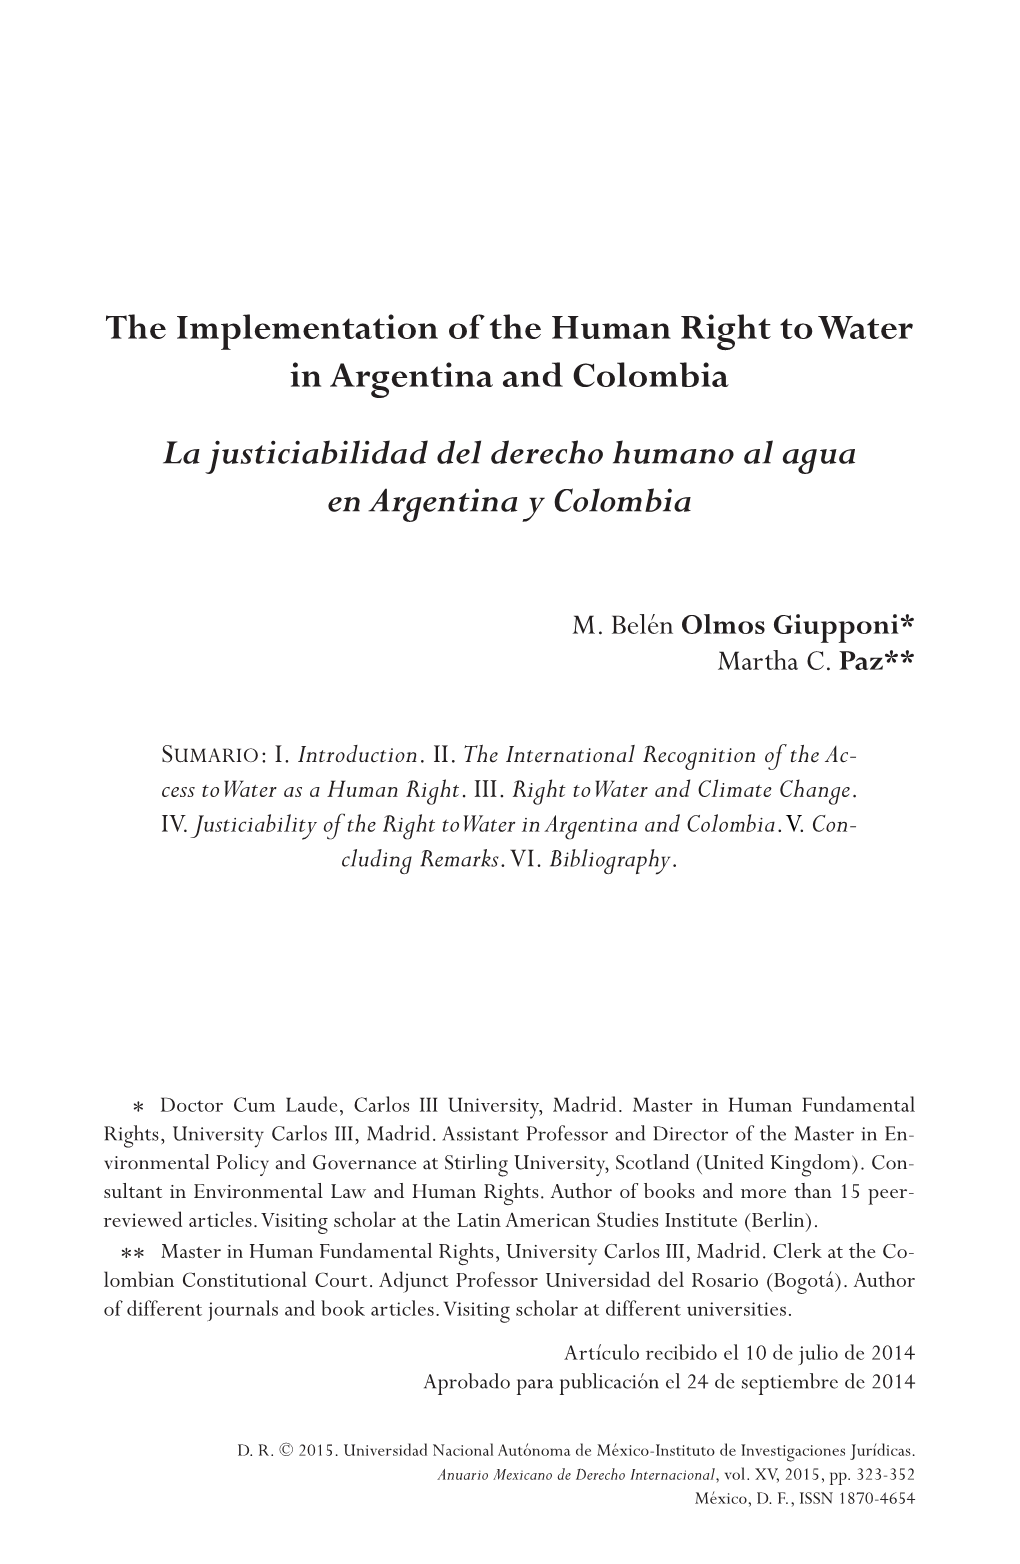 The Implementation of the Human Right to Water in Argentina and Colombia La Justiciabilidad Del Derecho Humano Al Agua En Argentina Y Colombia